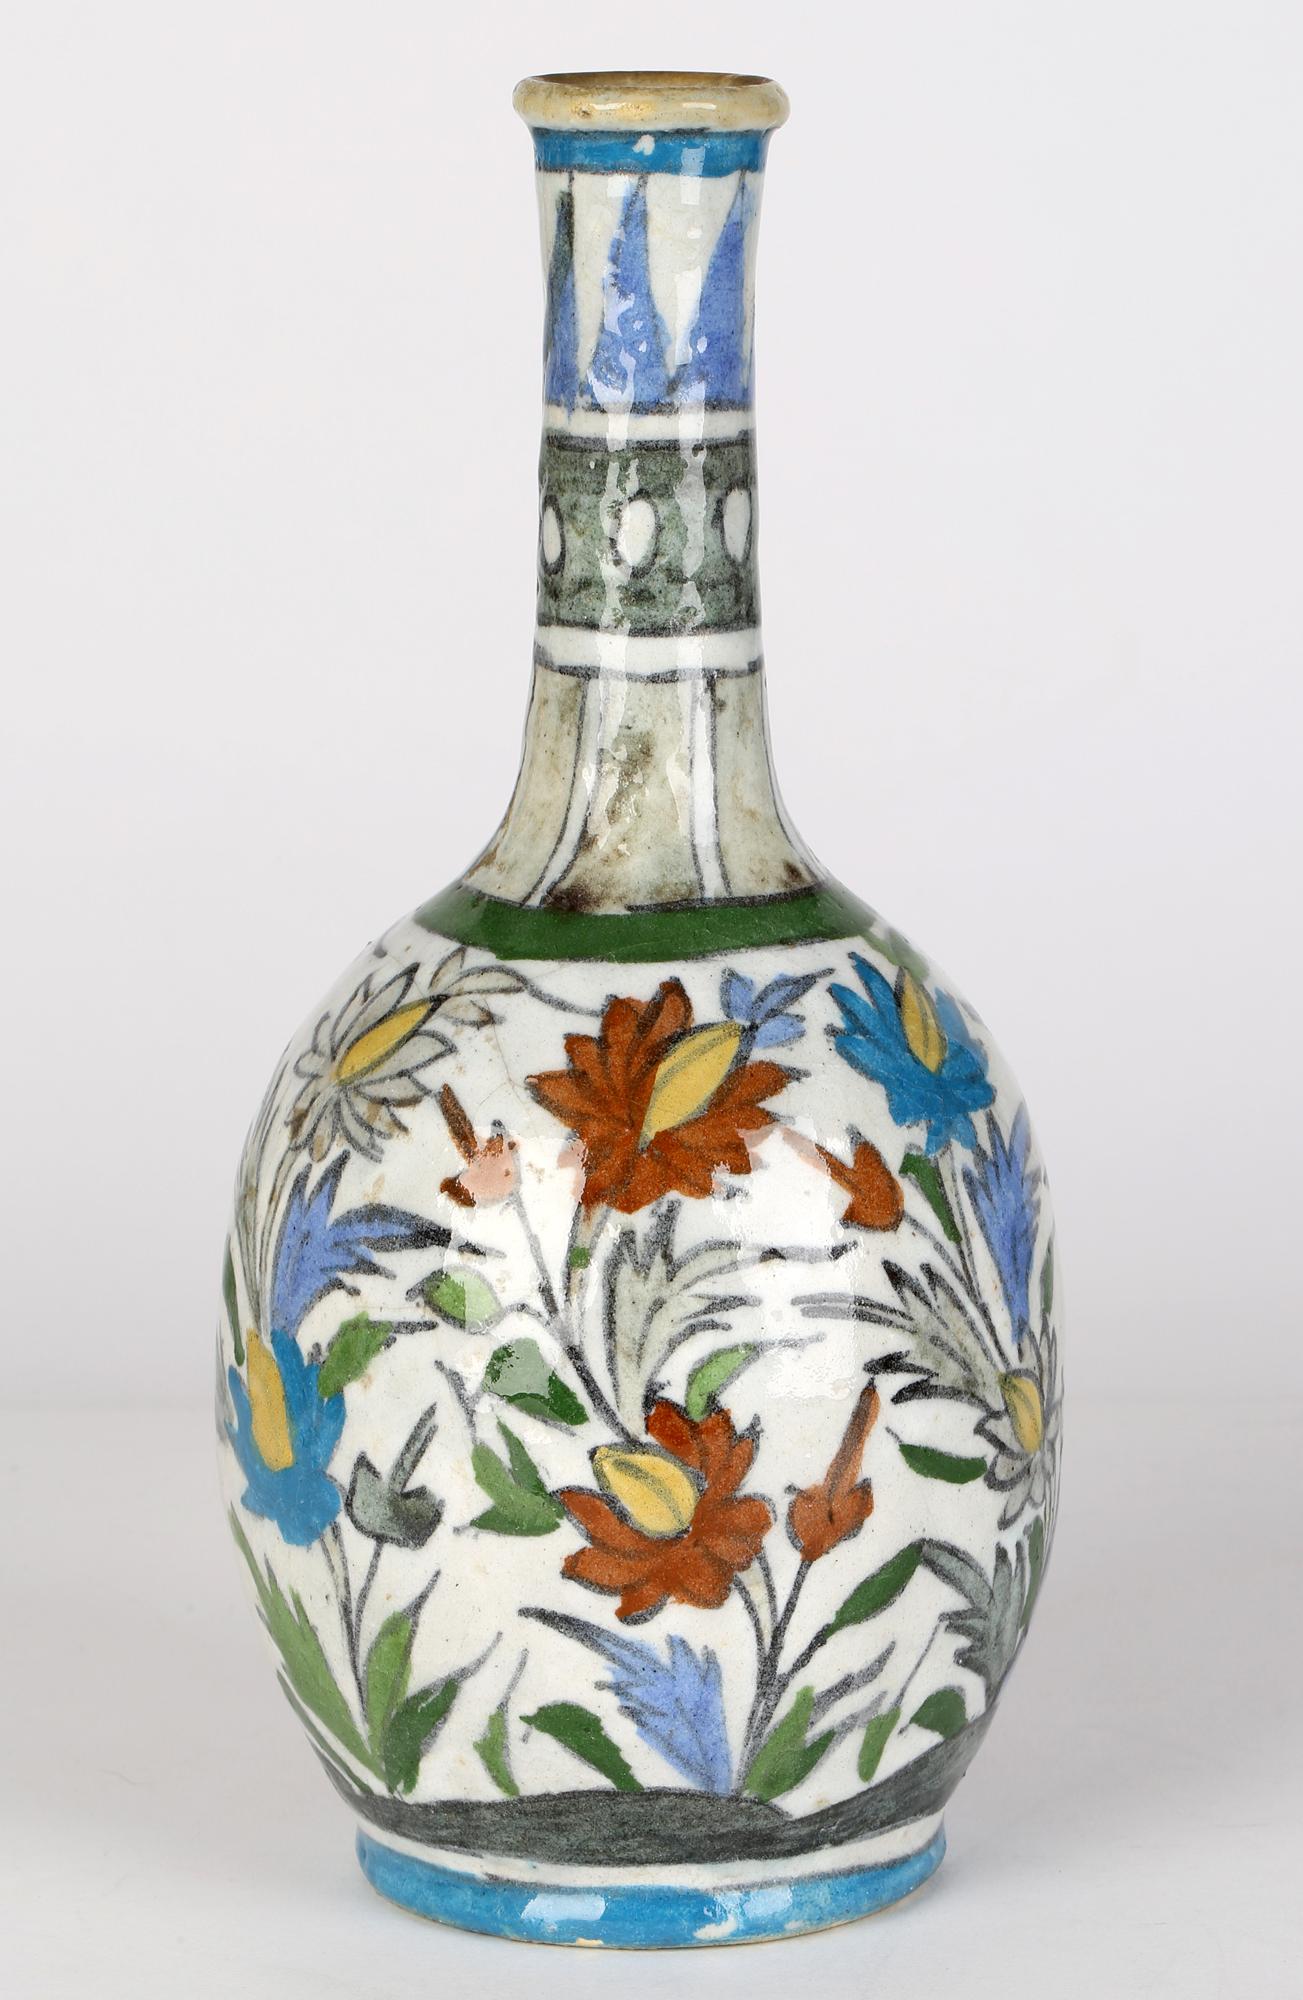 Persian Art Pottery Bottle Shape Vase Hand-Painted with Floral Designs 4